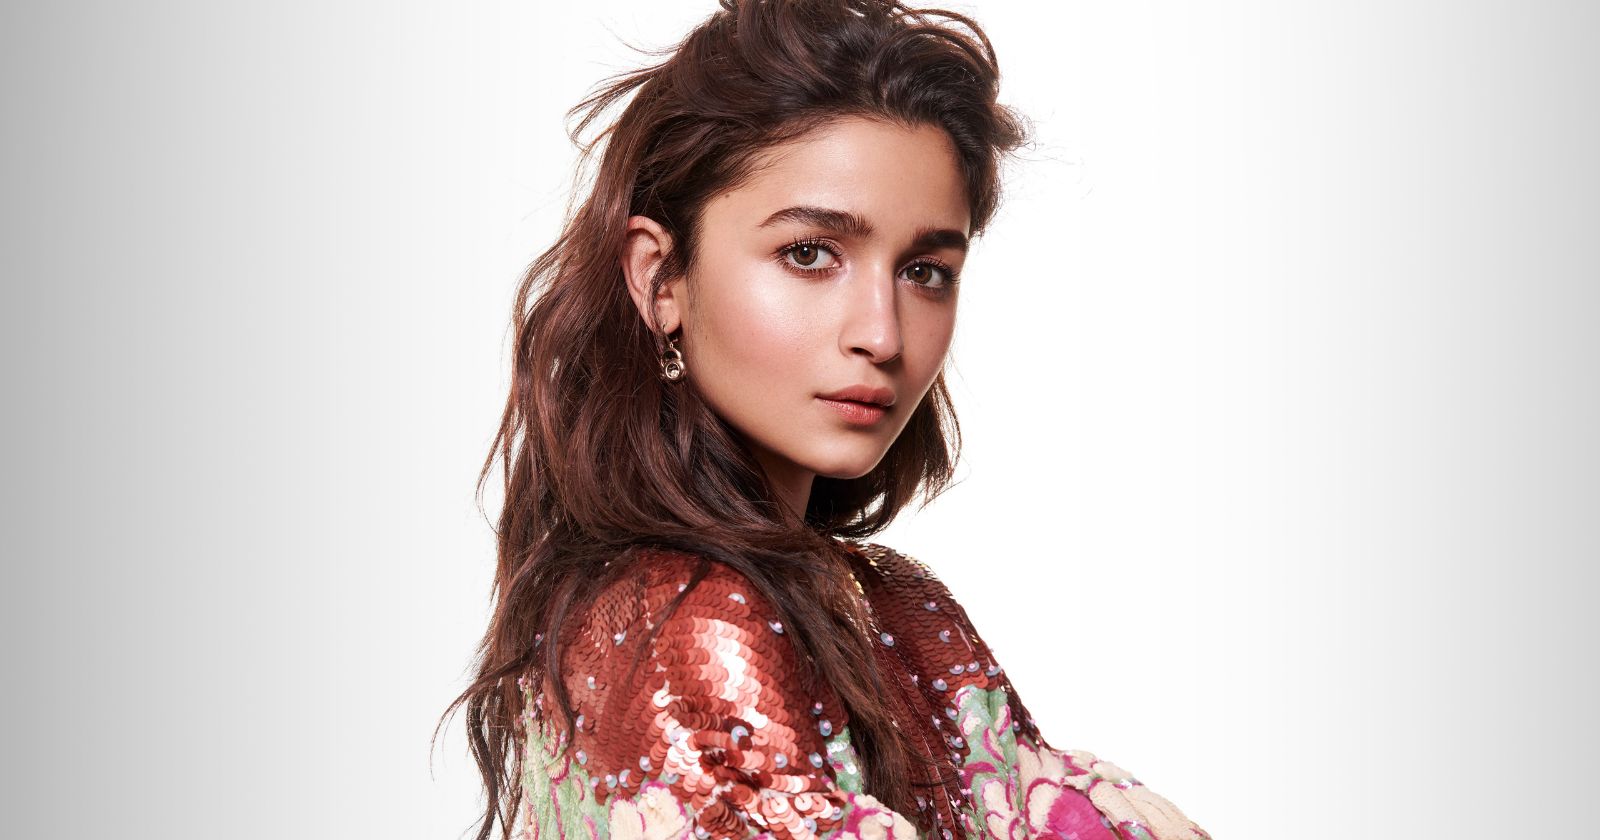 How to Recreate Alia Bhatt's Hairstyles Using Hair Extensions